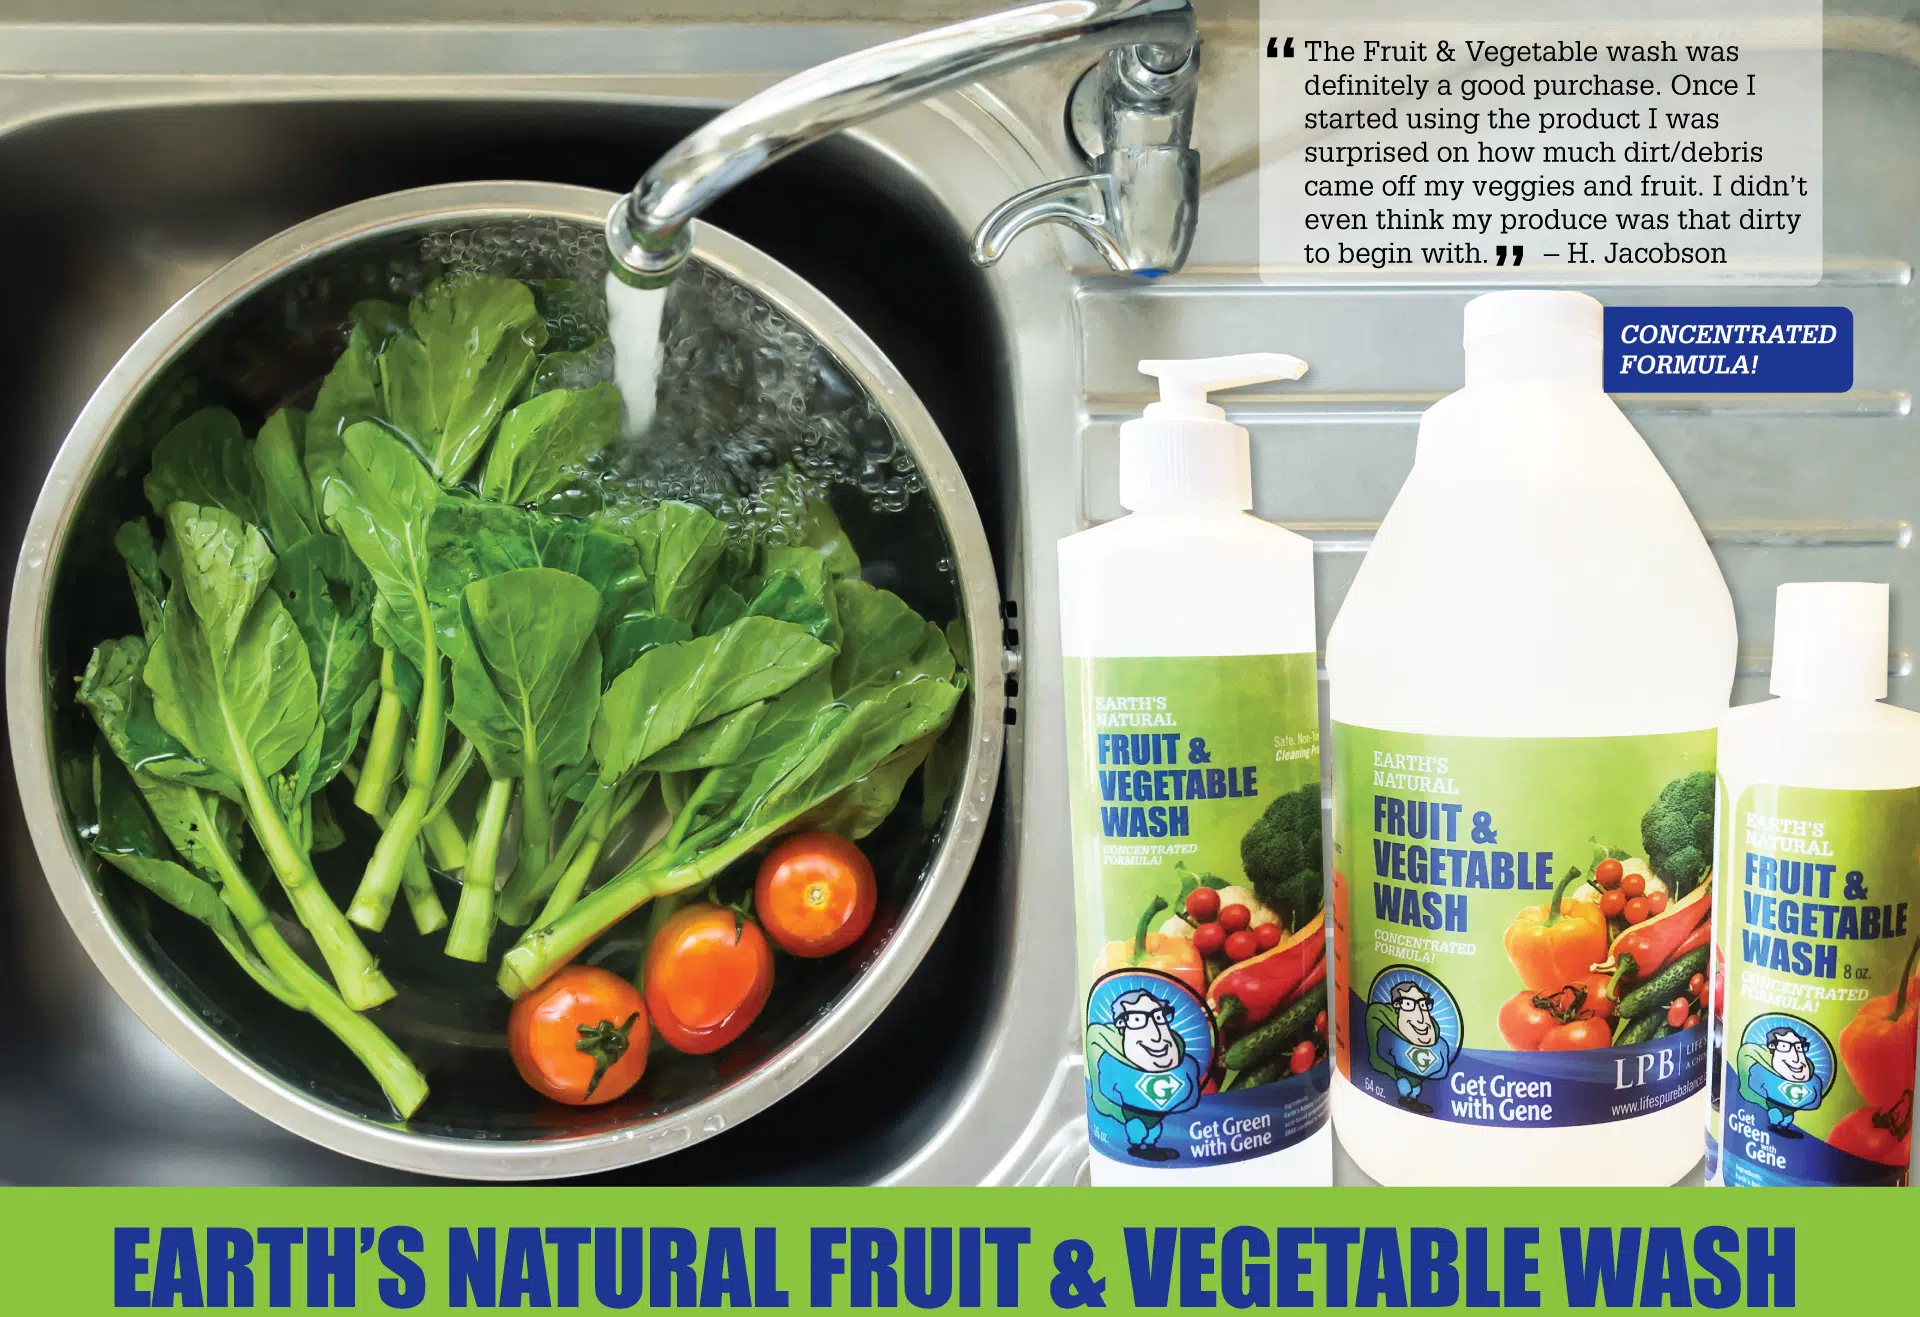 I am one of Life's Pure Balance's biggest fan. Their Earth's Natural Fruit & Vegetable wash is my favorite.